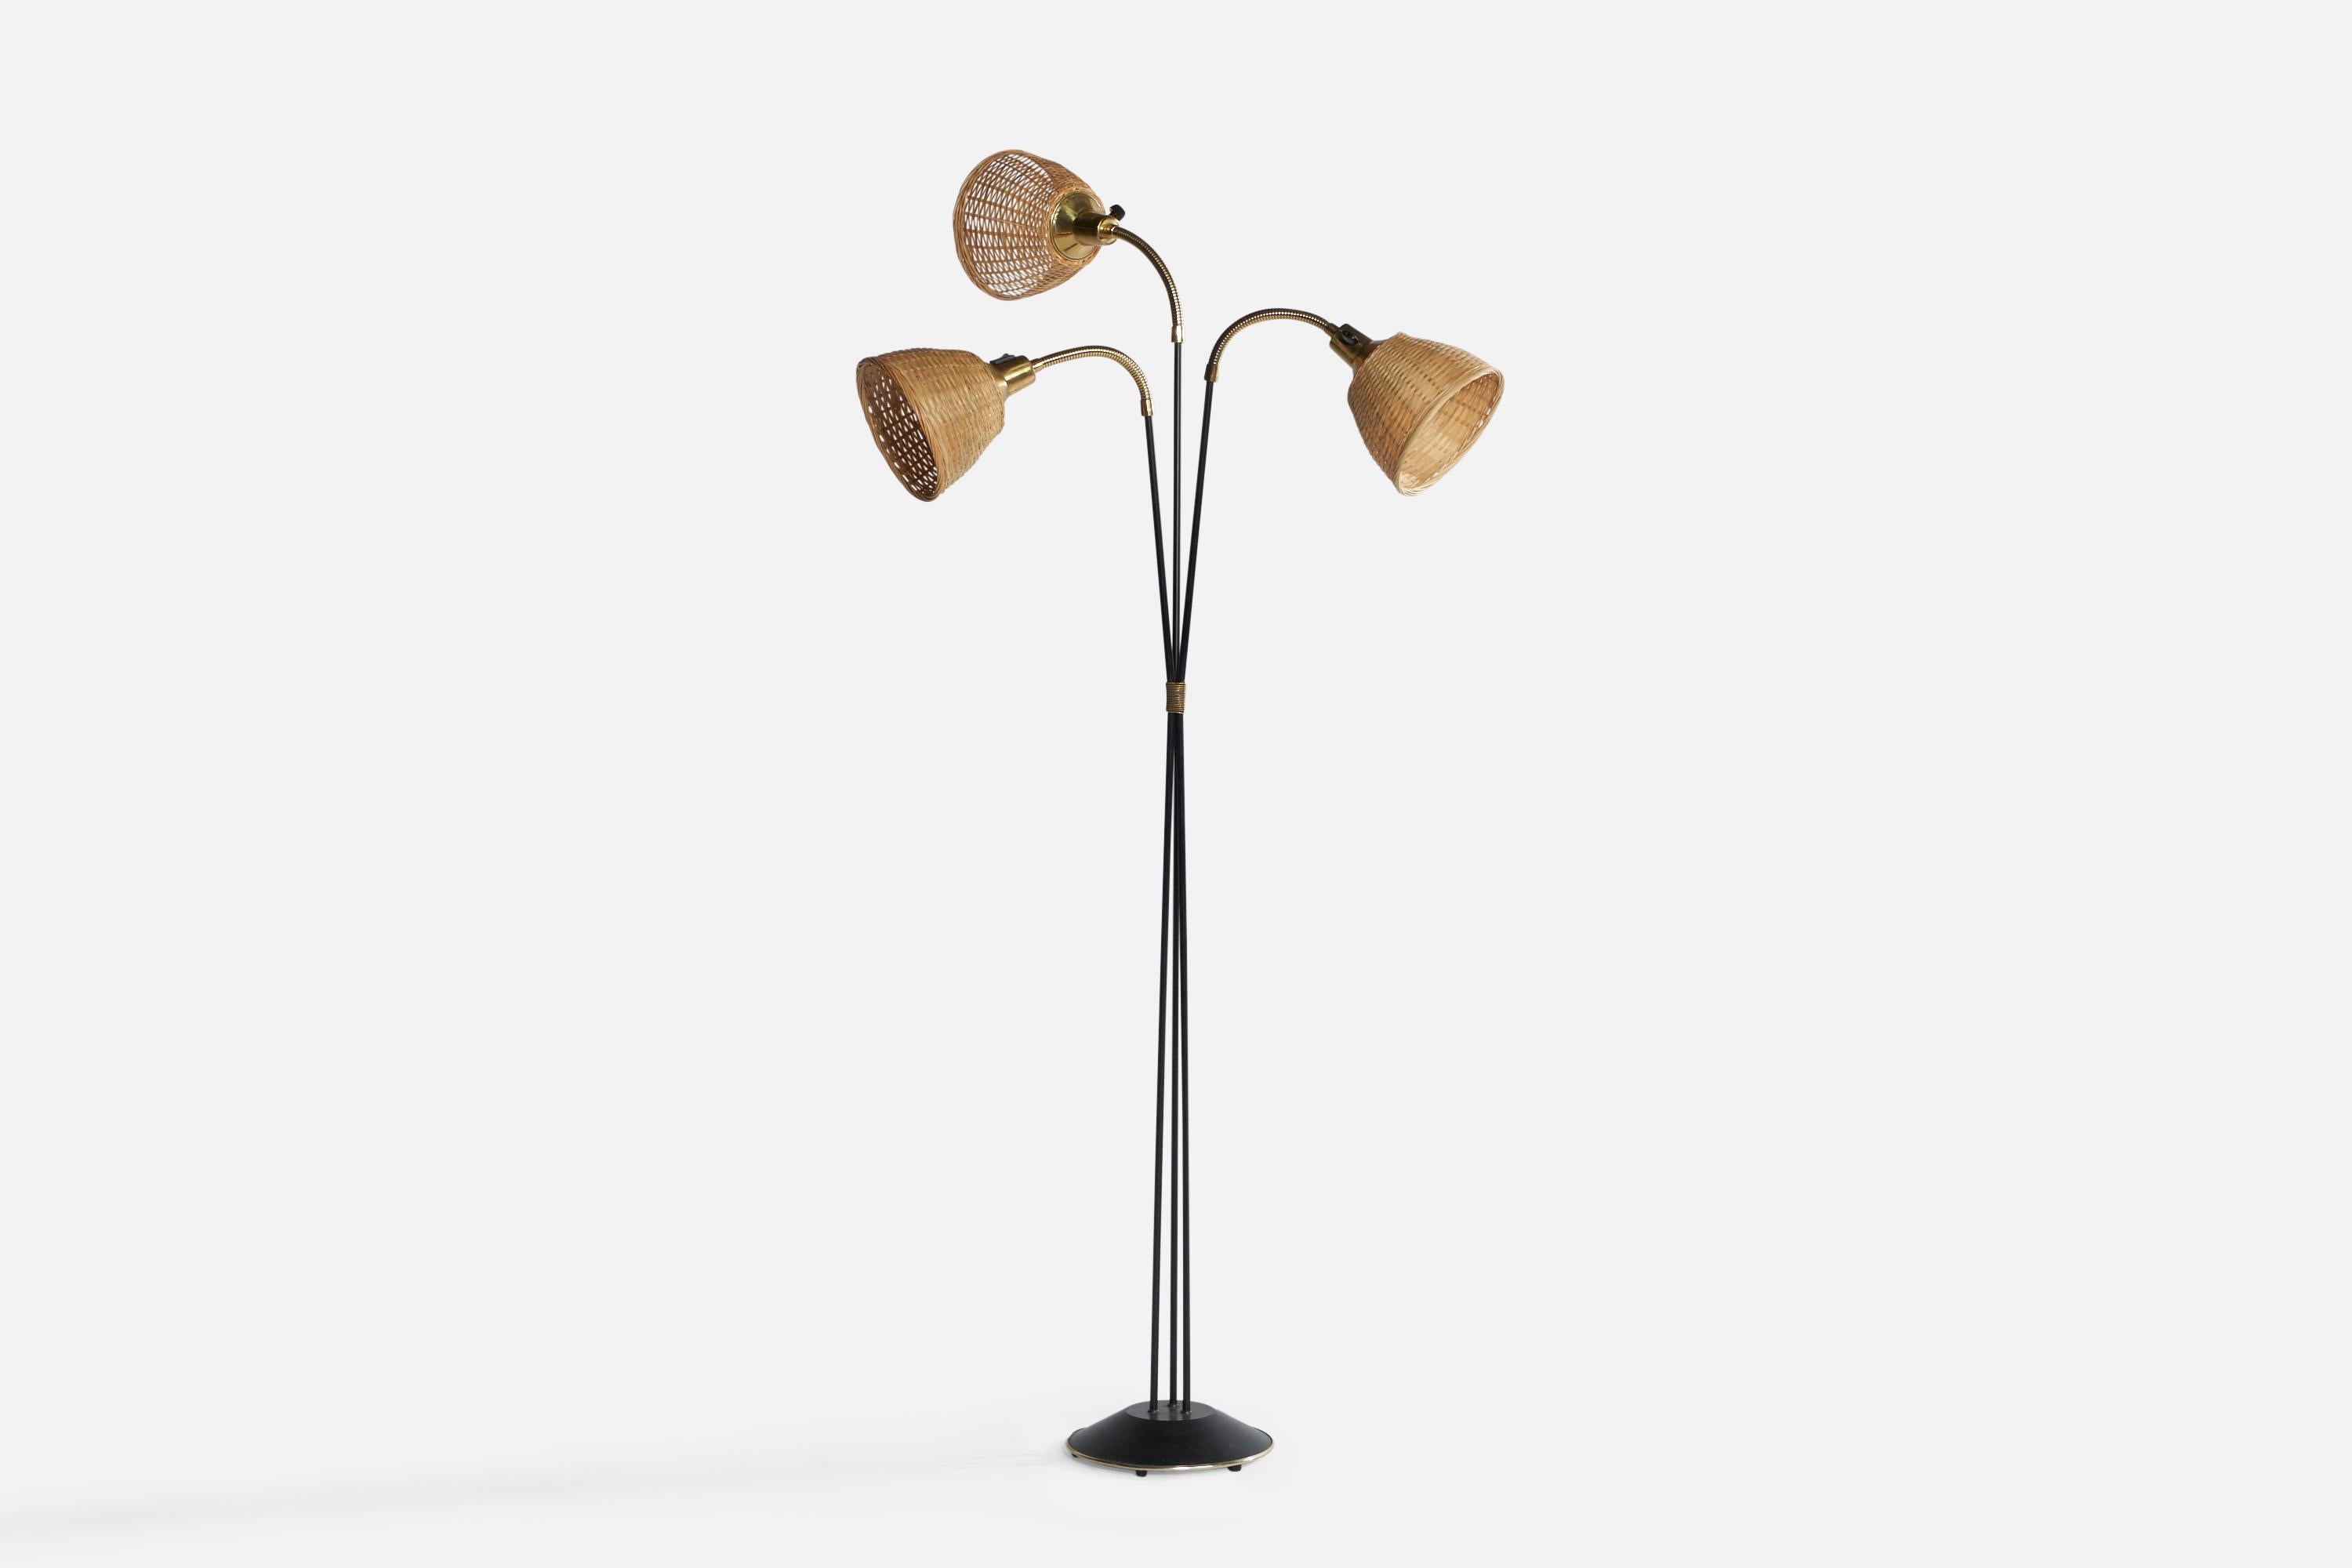 A brass, black-lacquered iron and rattan floor lamp designed and produced in Sweden, 1950s.

Overall Dimensions (inches): 55.1” H x 28.55” W x 19.75” D. Stated dimensions include shades.
Bulb Specifications: E-26 Bulbs
Number of Sockets: 2
All